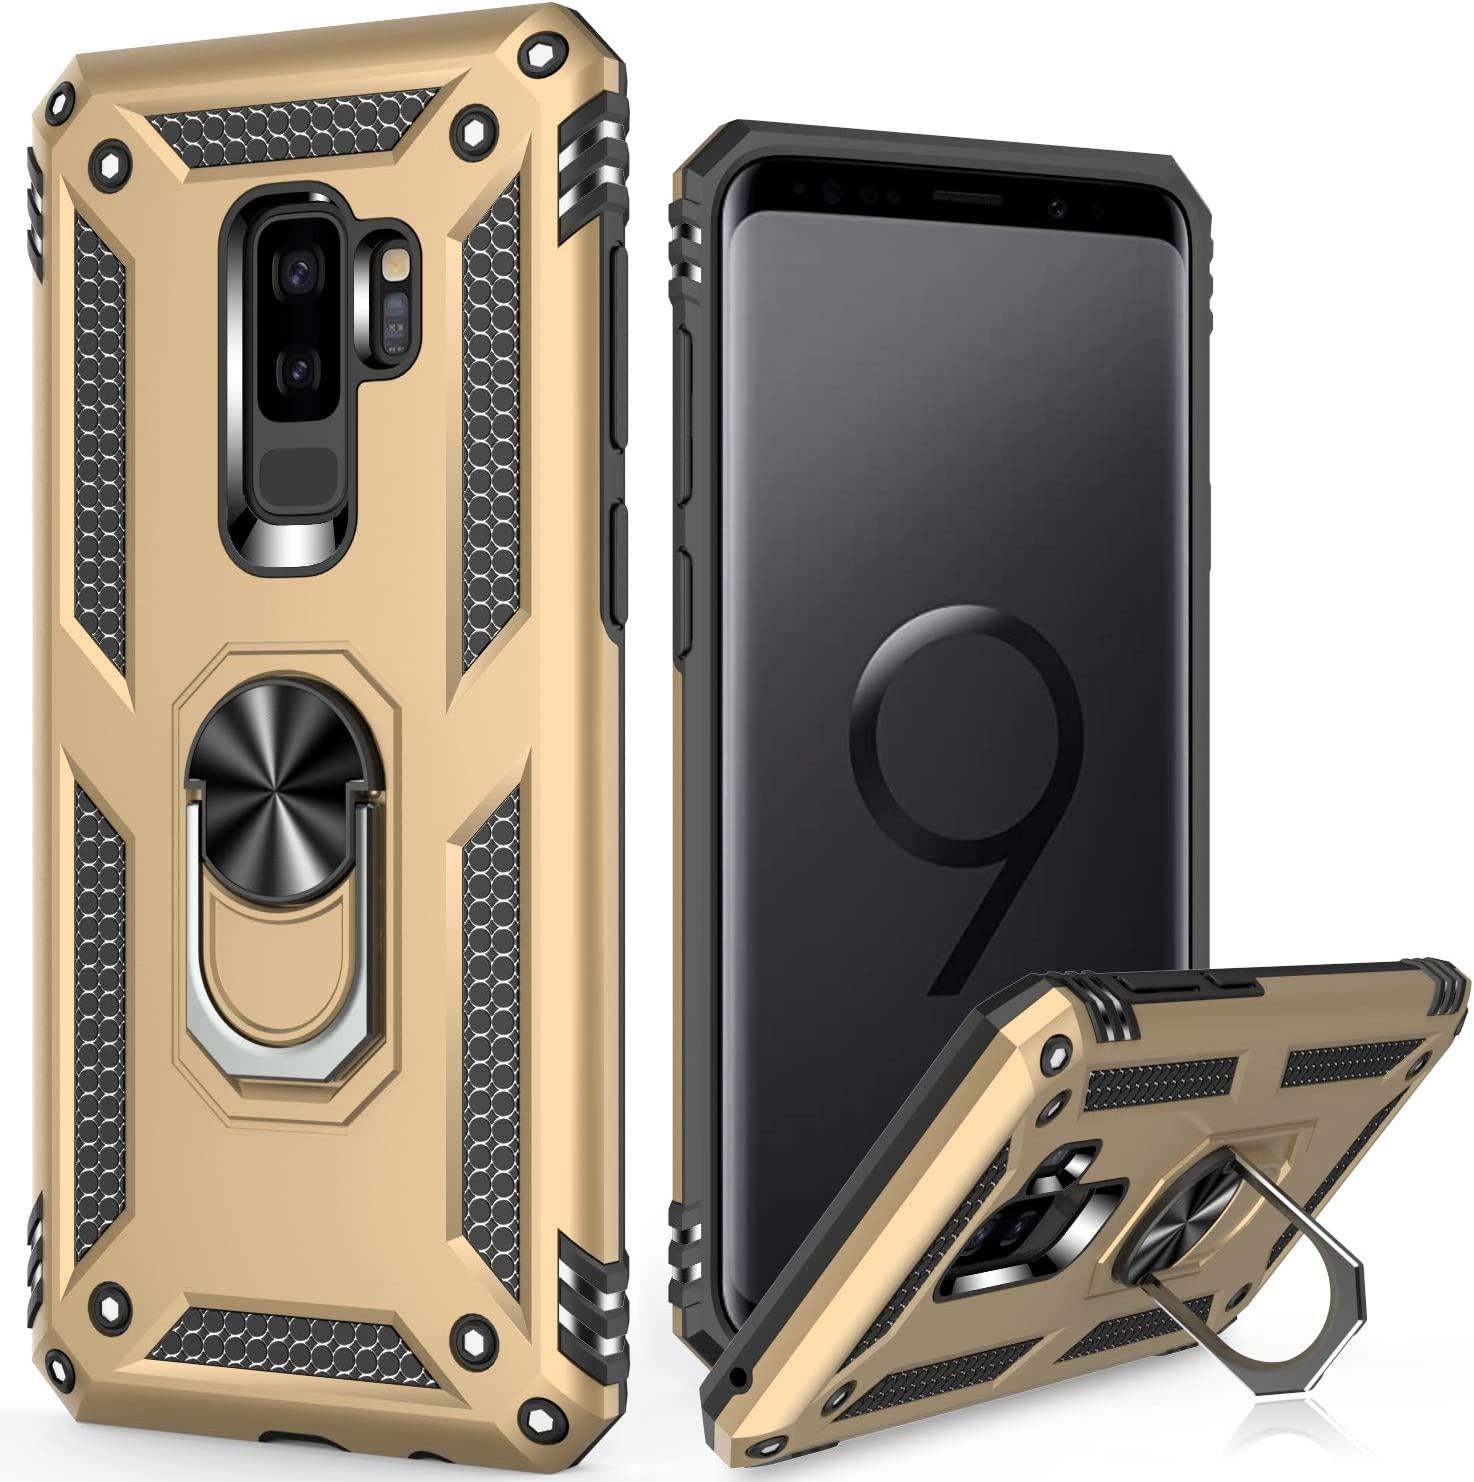 LUMARKE, LUMARKE Galaxy S9+ Plus Case,Pass 16ft Drop Test Military Grade Heavy Duty Cover with Magnetic Kickstand Compatible with Car Mount Holder,Protective Phone Case for Samsung Galaxy S9 Plus Gold